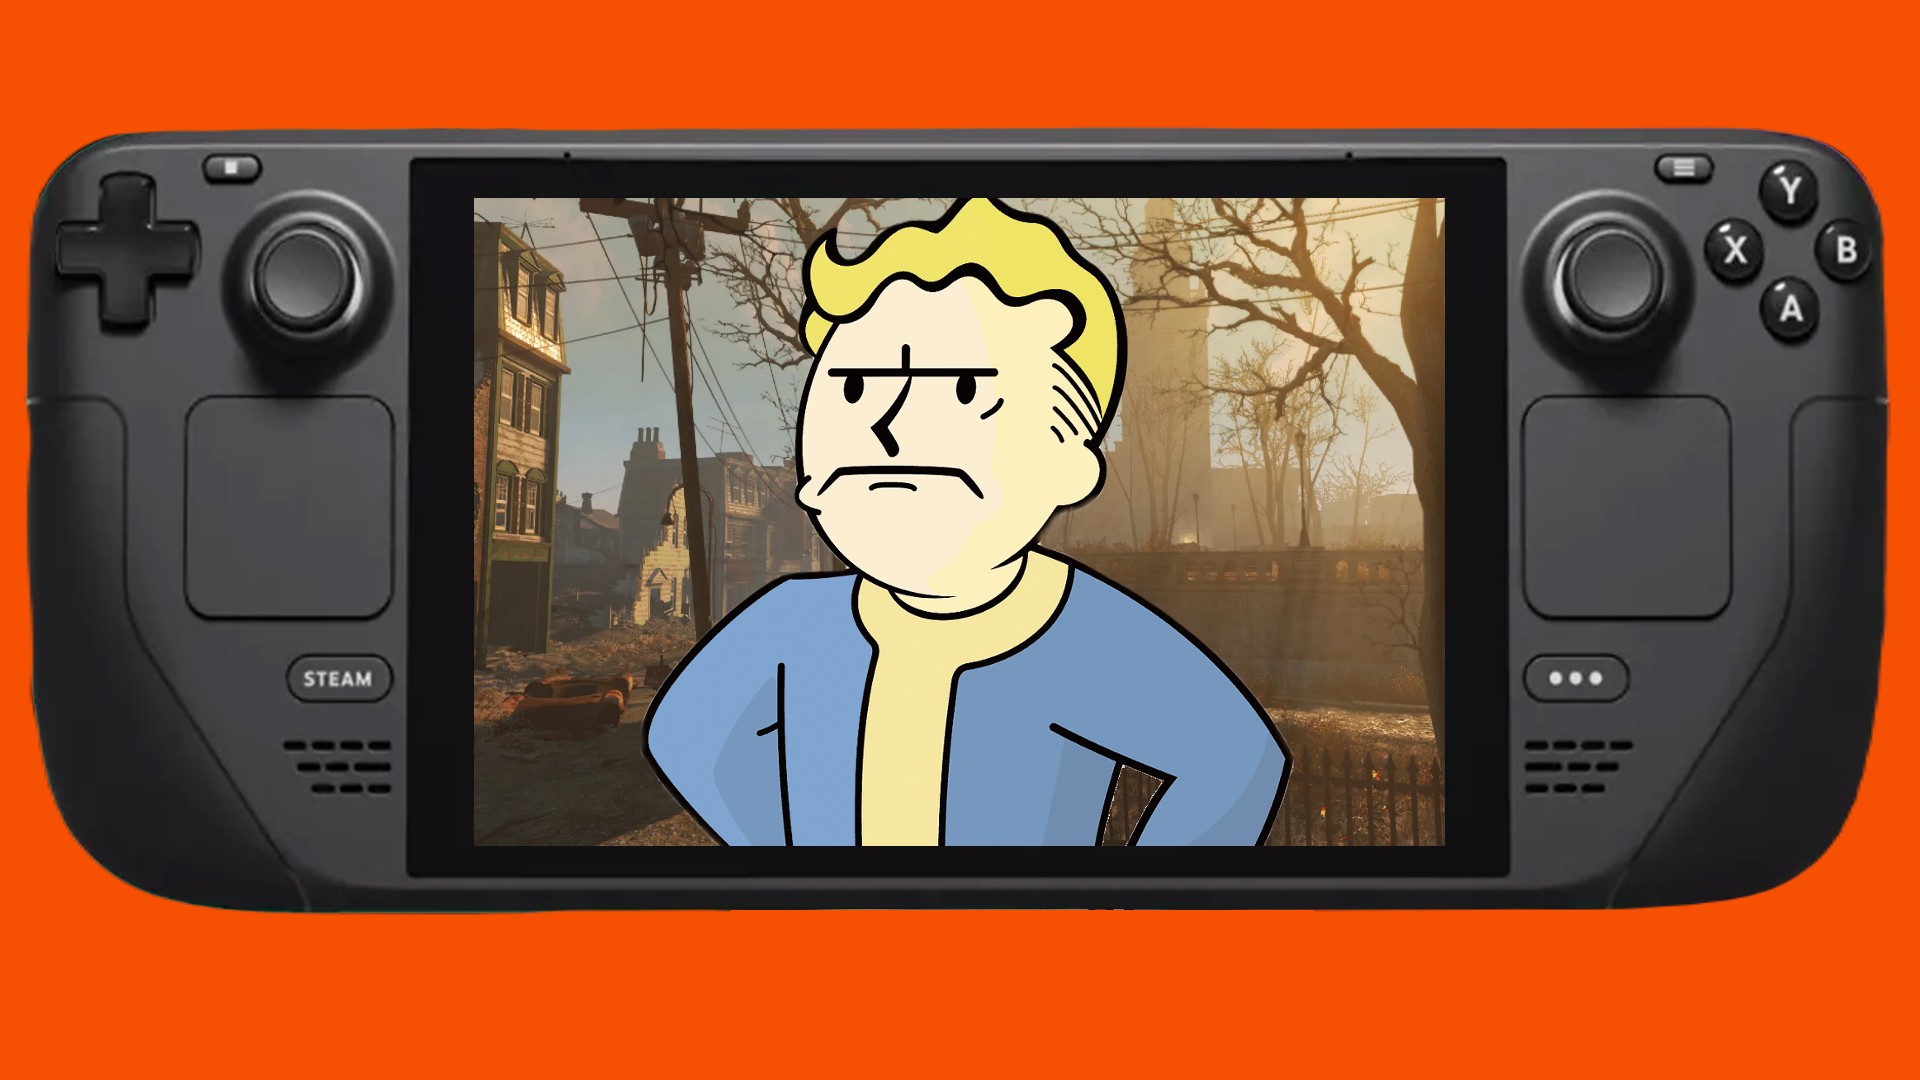 Fallout 4 on Steam Deck completely devalues Valve's Verified rating